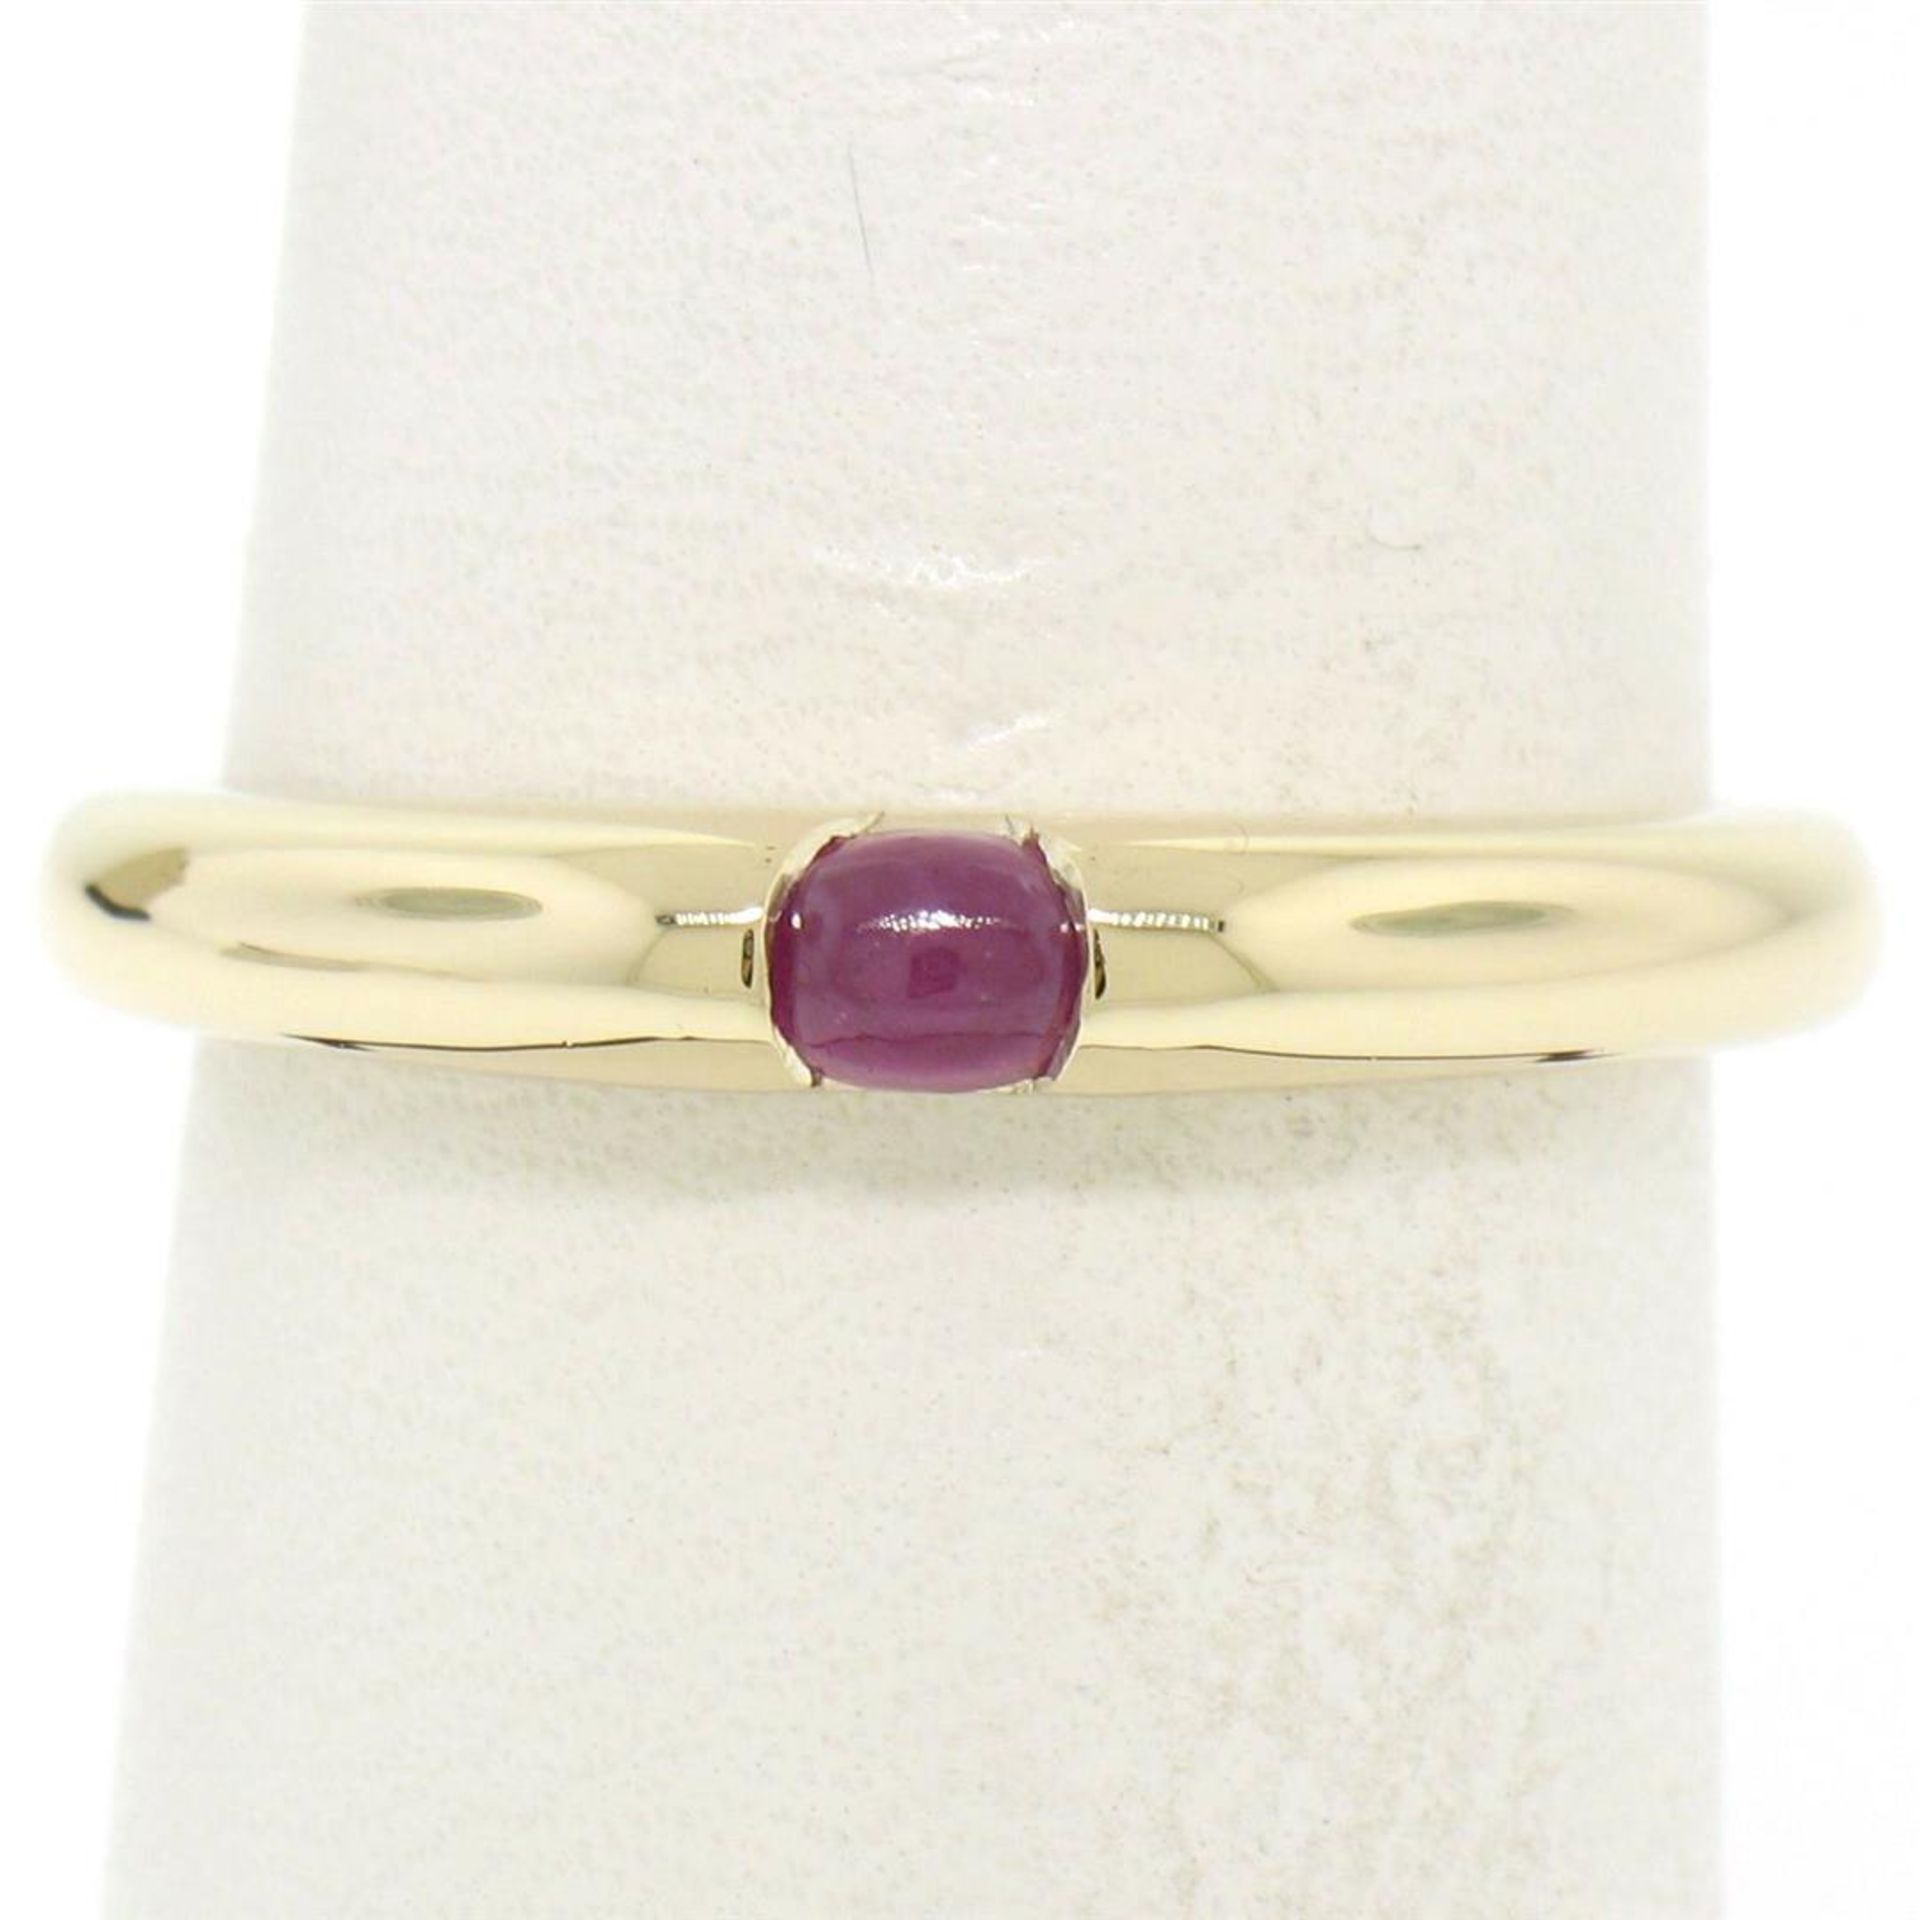 14K Tri Color Gold 3 Stackable Tension Set Emerald Sapphire Ruby Solitaire Rings - Image 7 of 8